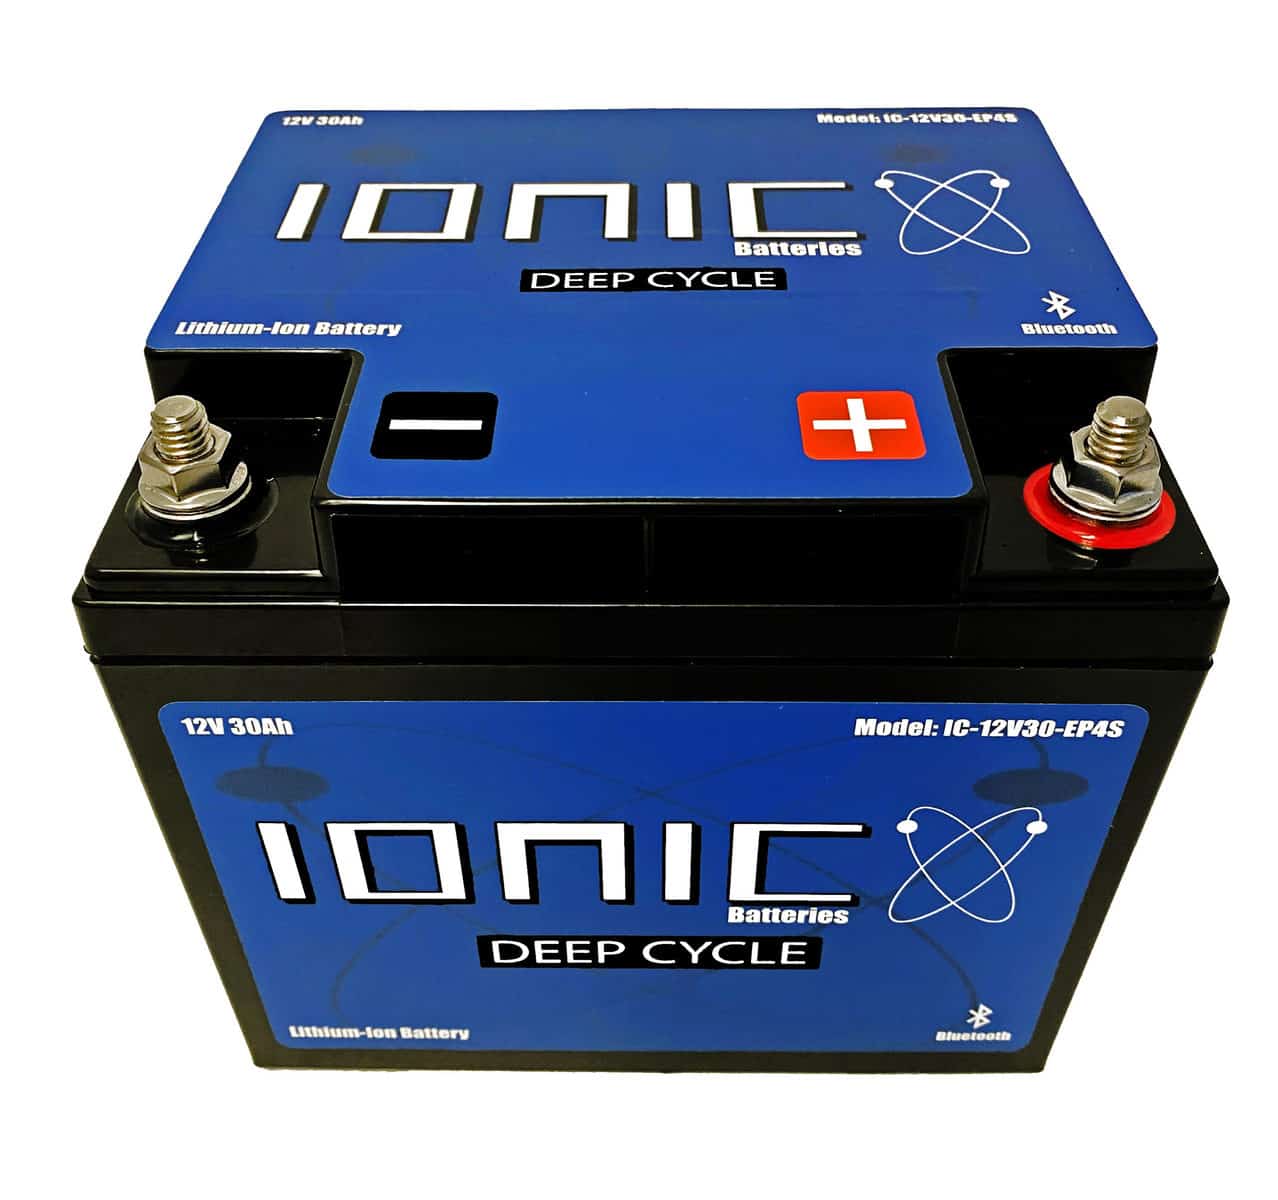 small 12 volt deep cycle battery